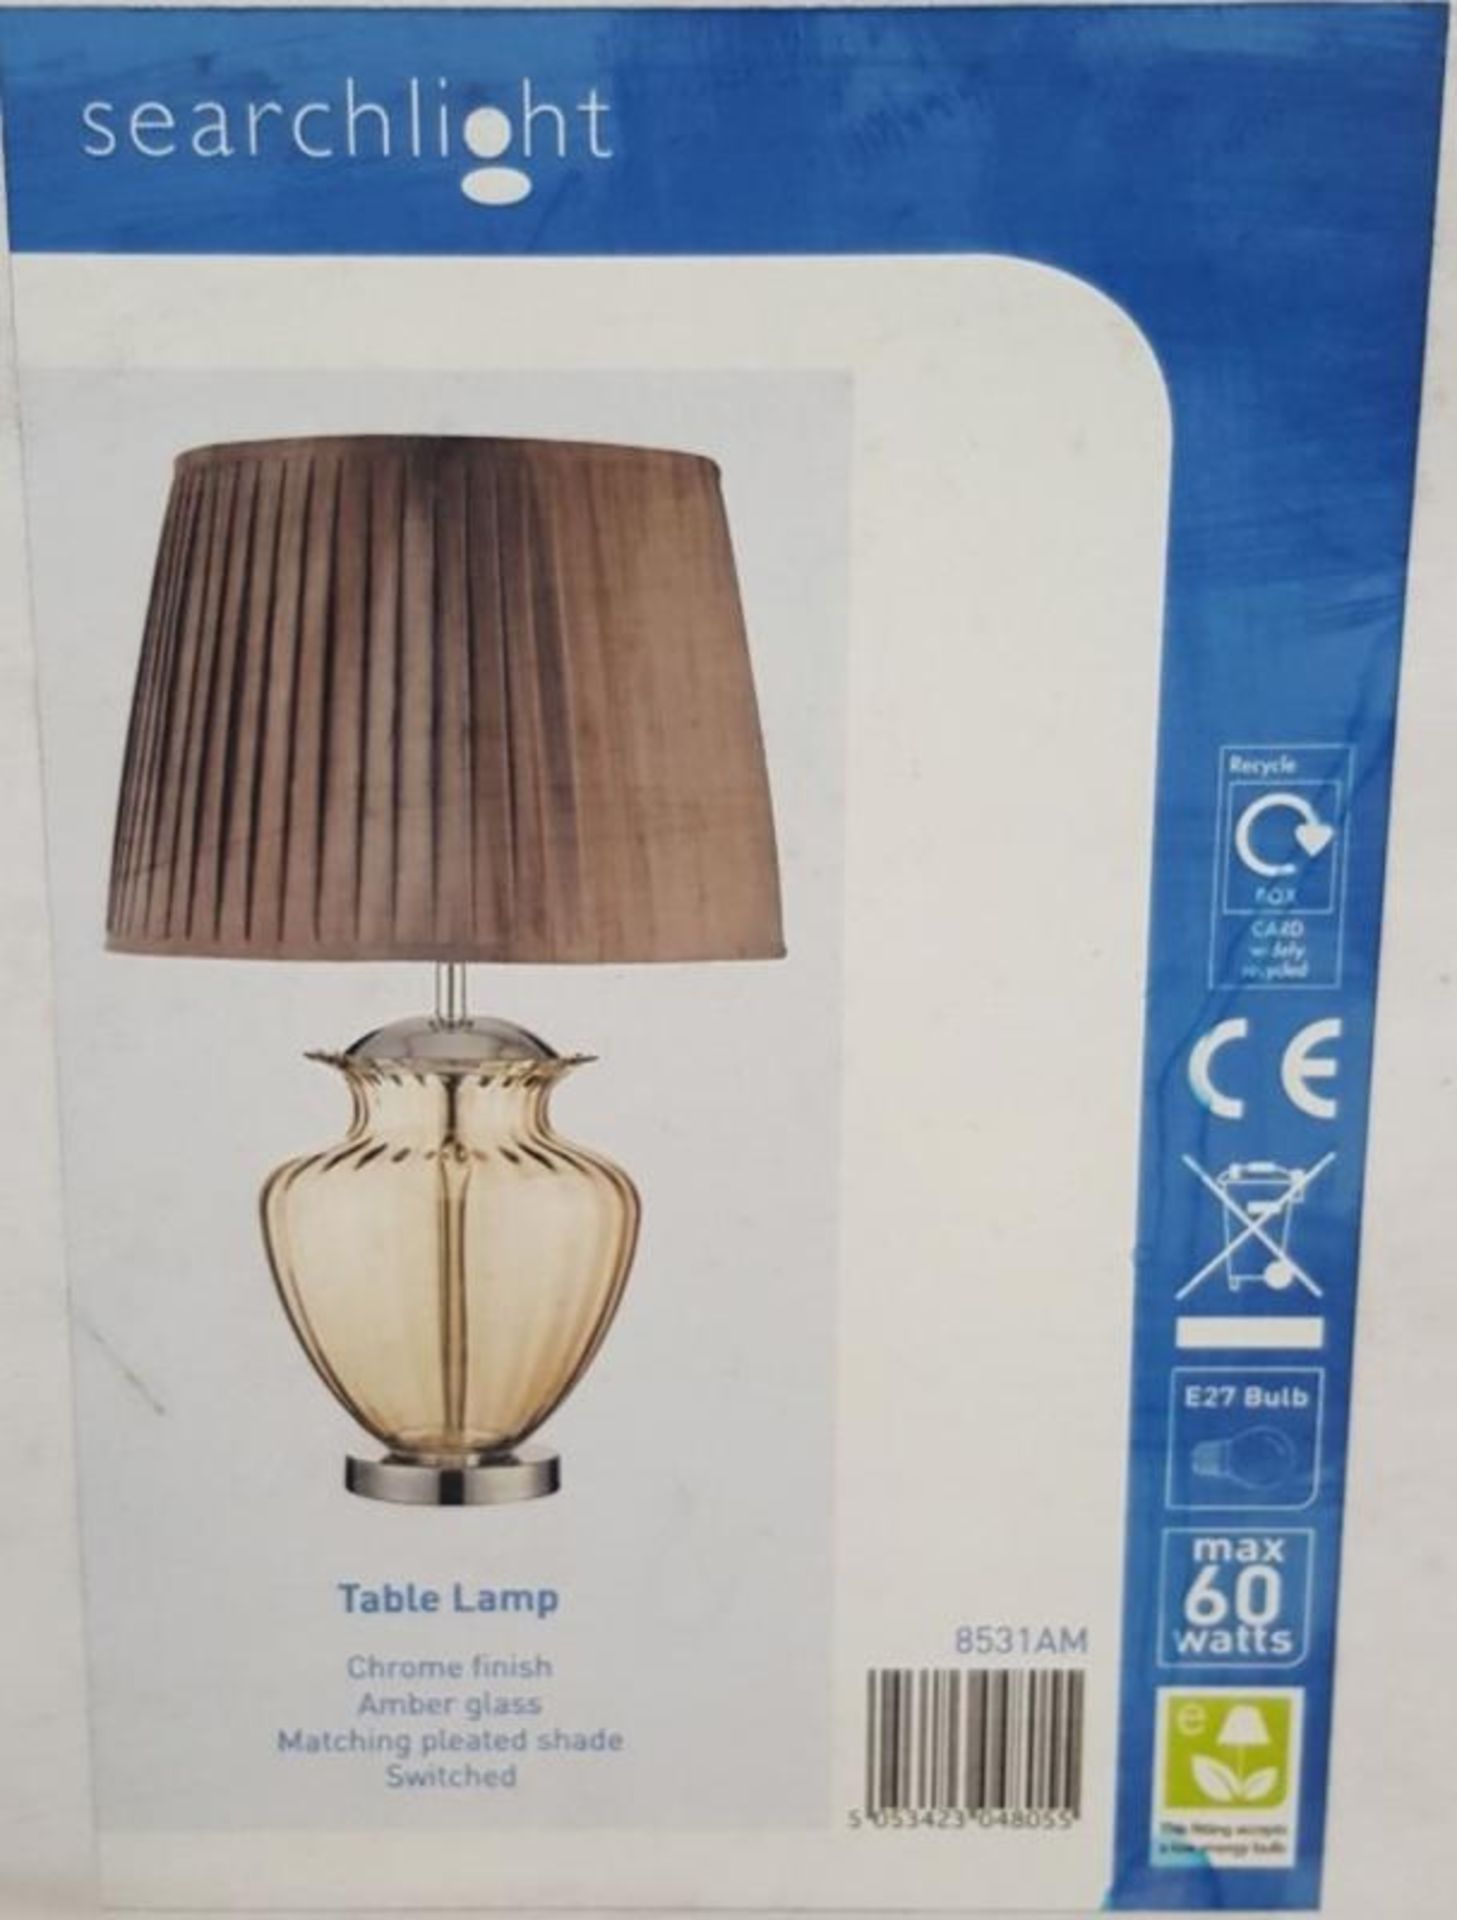 1 x Large 1-Light Table Lamp Polished Chrome Amber - New Boxed Stock - CL323 - WH2 AA5 - REF: 8531AM - Image 2 of 2